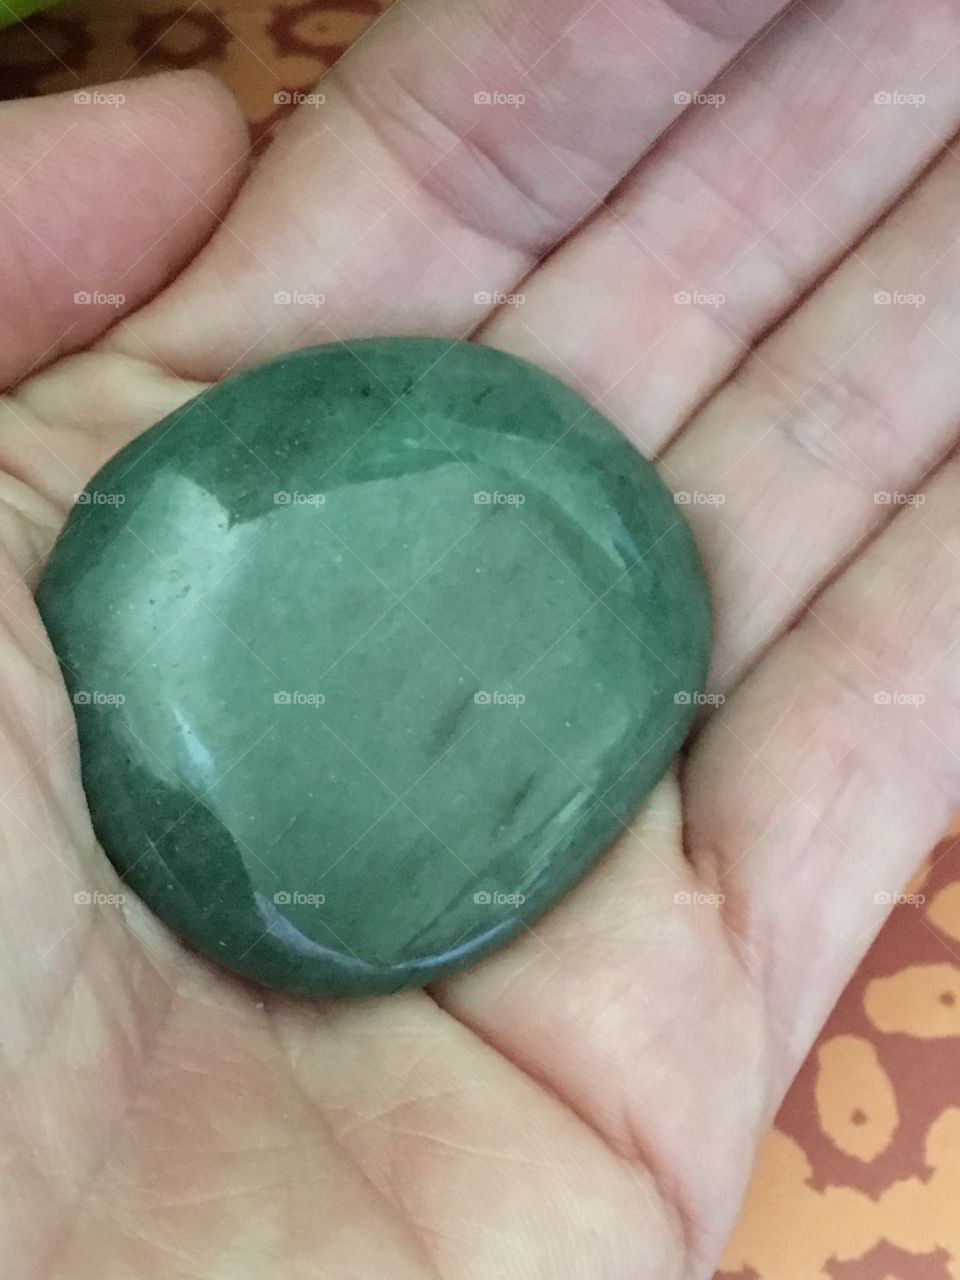 Jade in the palm of your hand